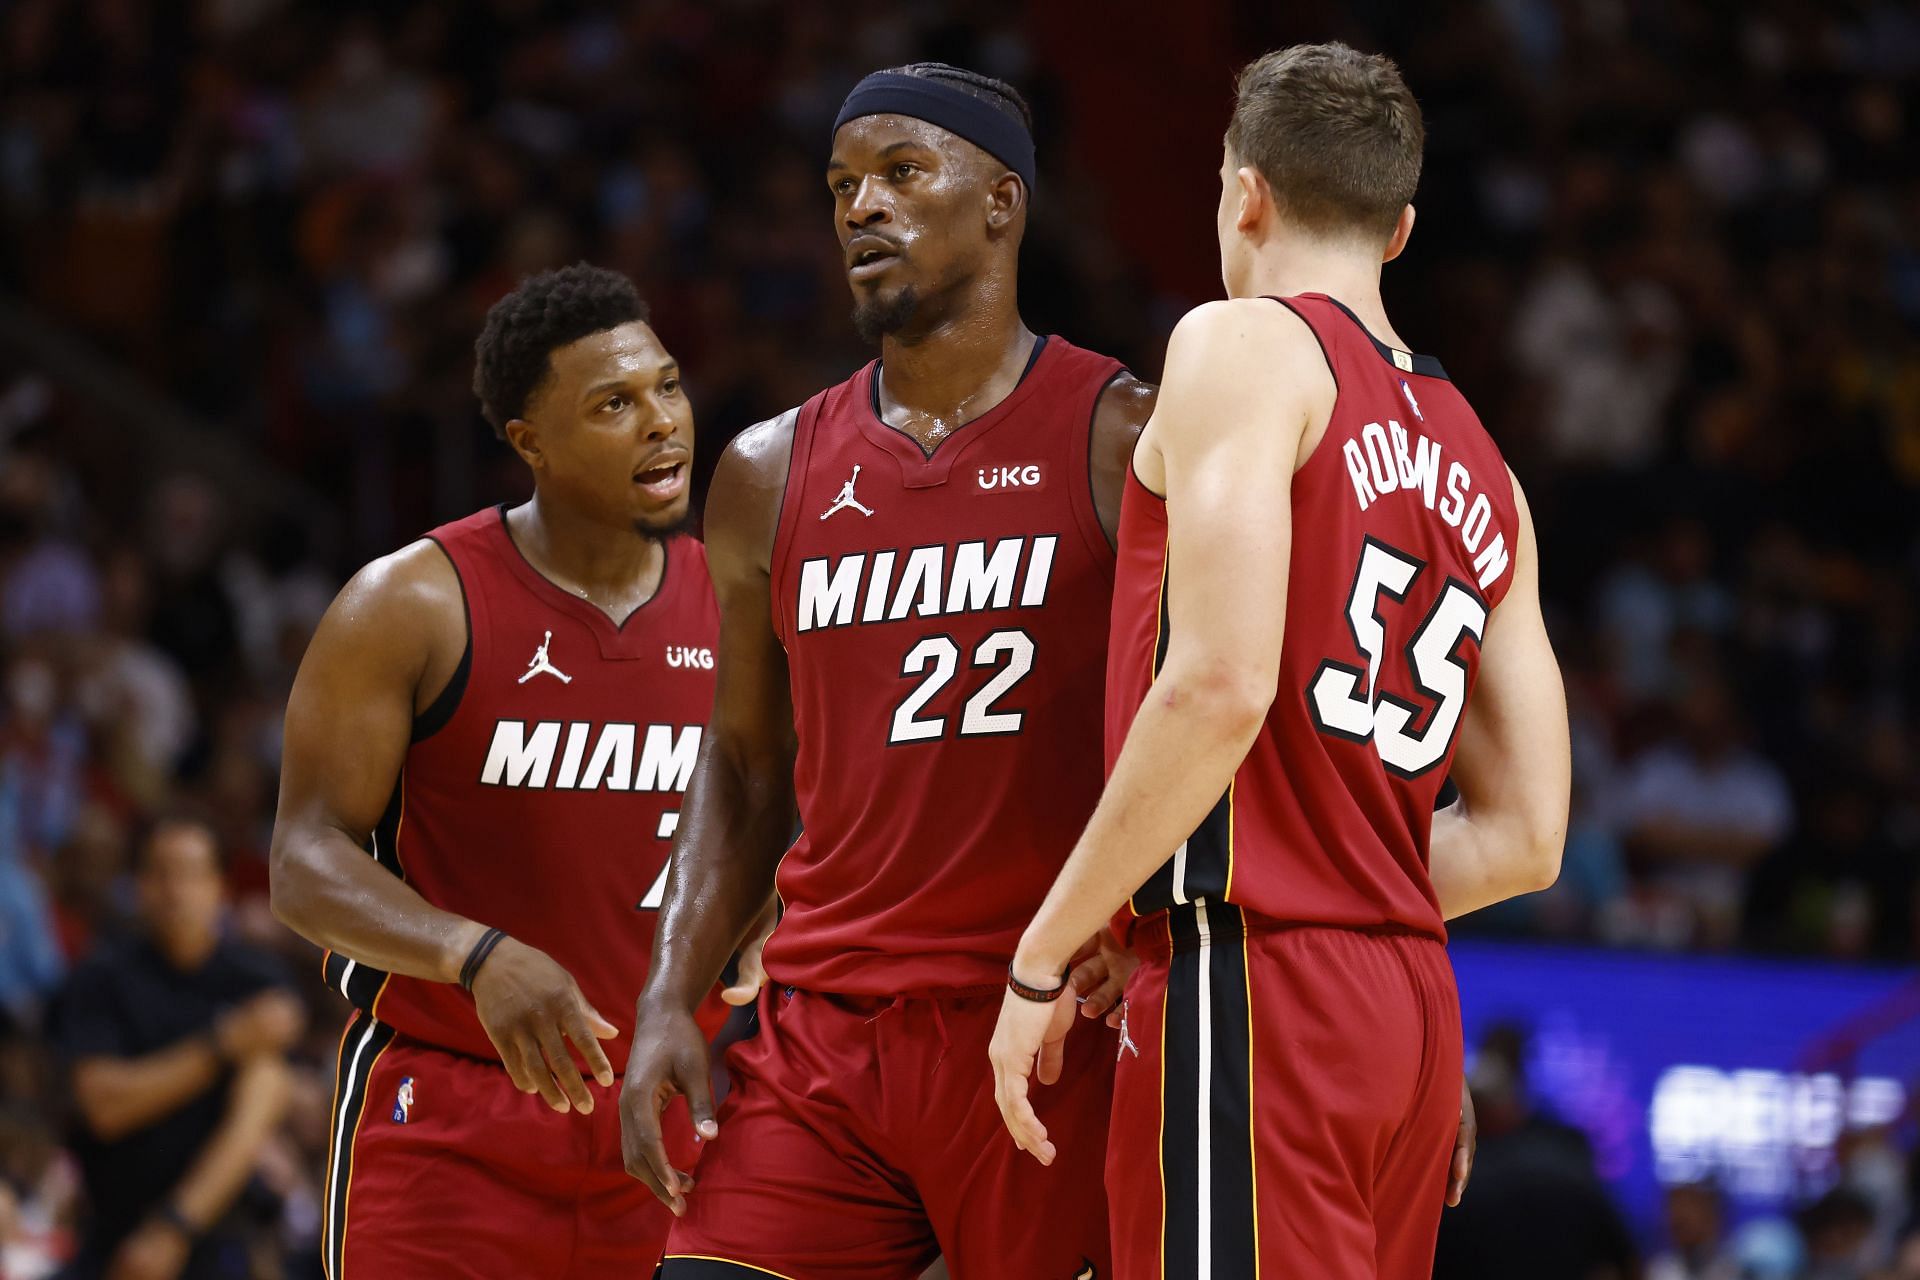 The Miami Heat hope to bounce back after losing to the Washington Wizards in their last game.